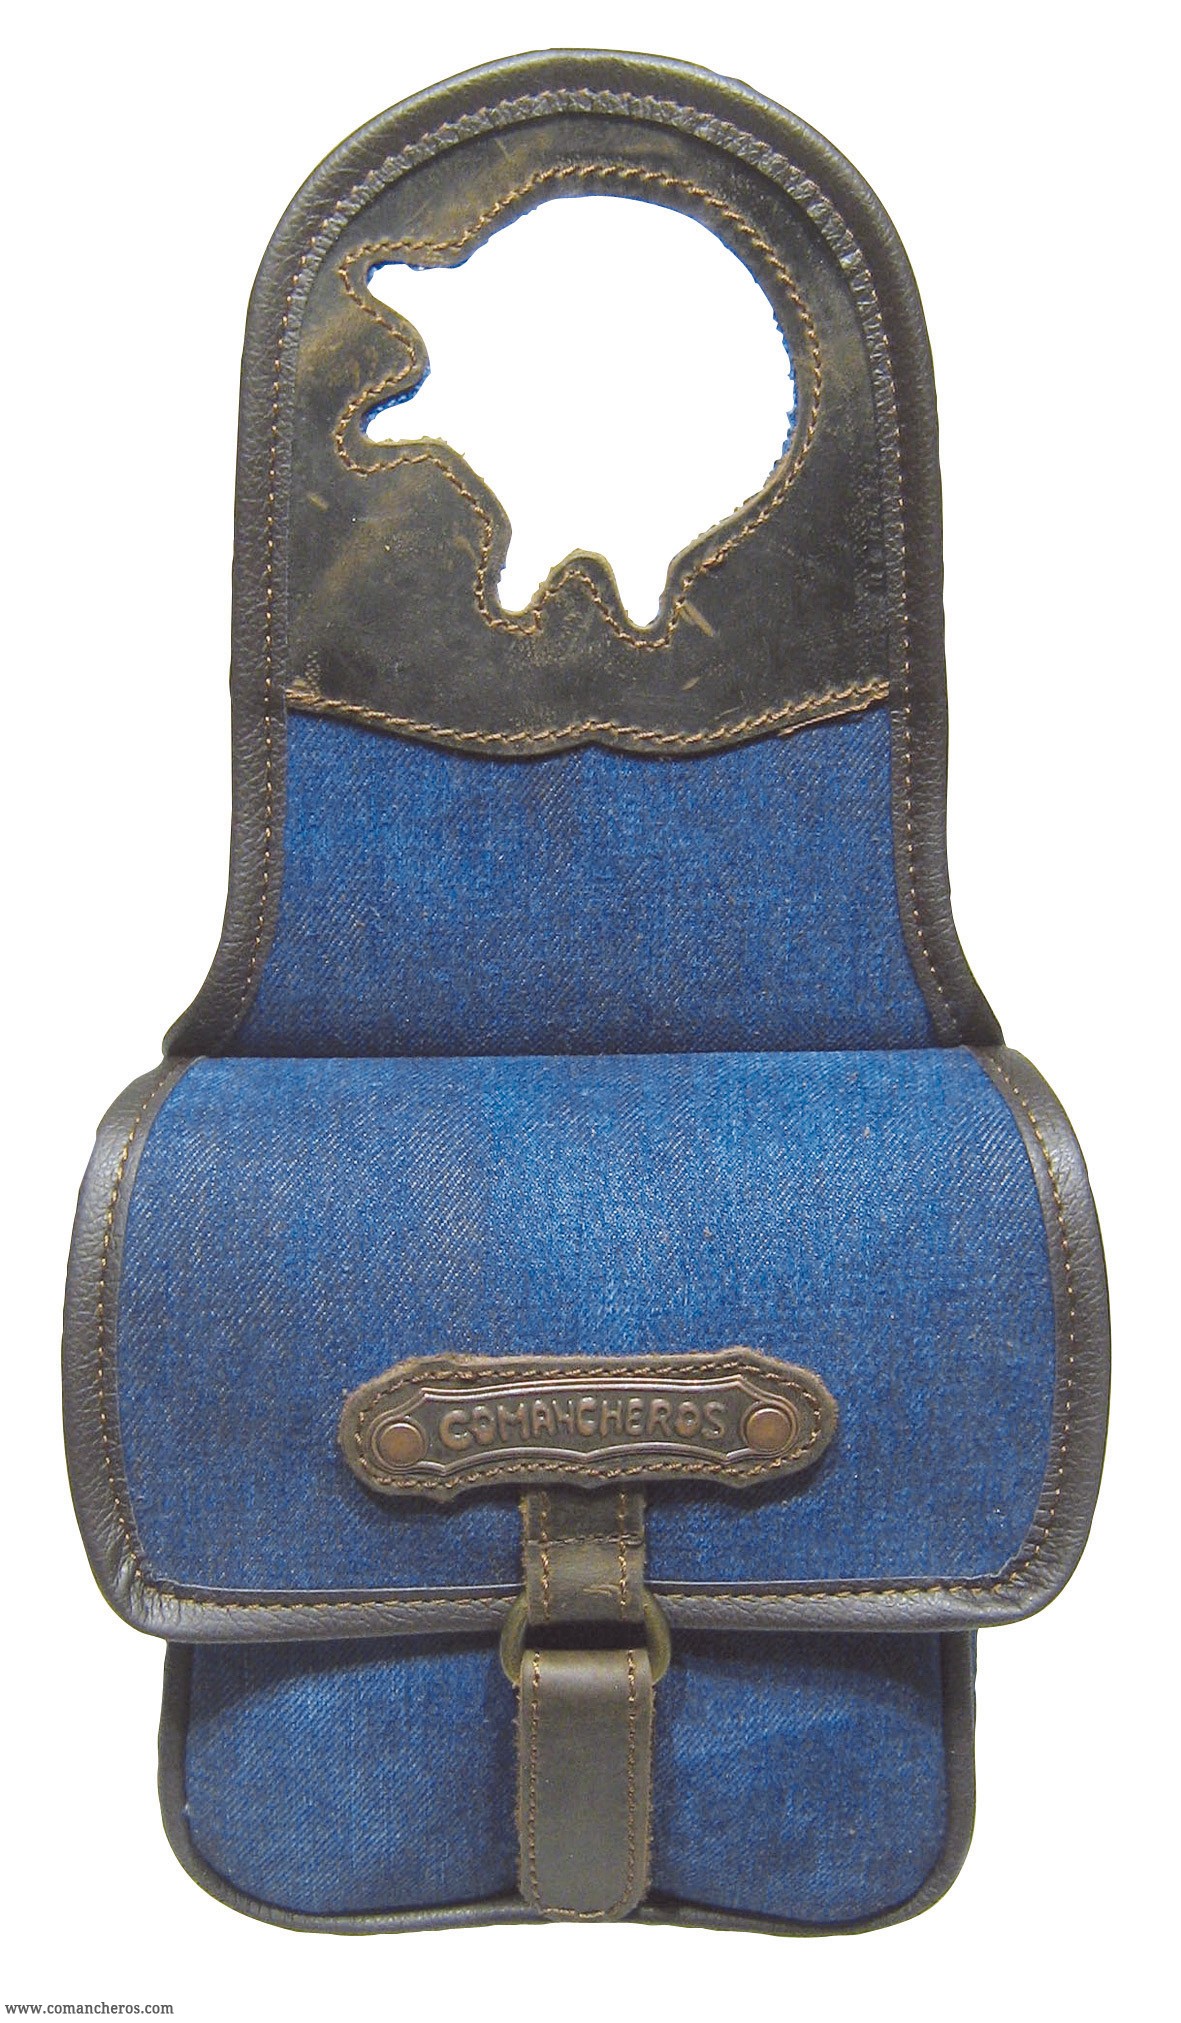 Very small Horne bag Comancheros, for Western saddle, made from Denim Waterproof and Leather